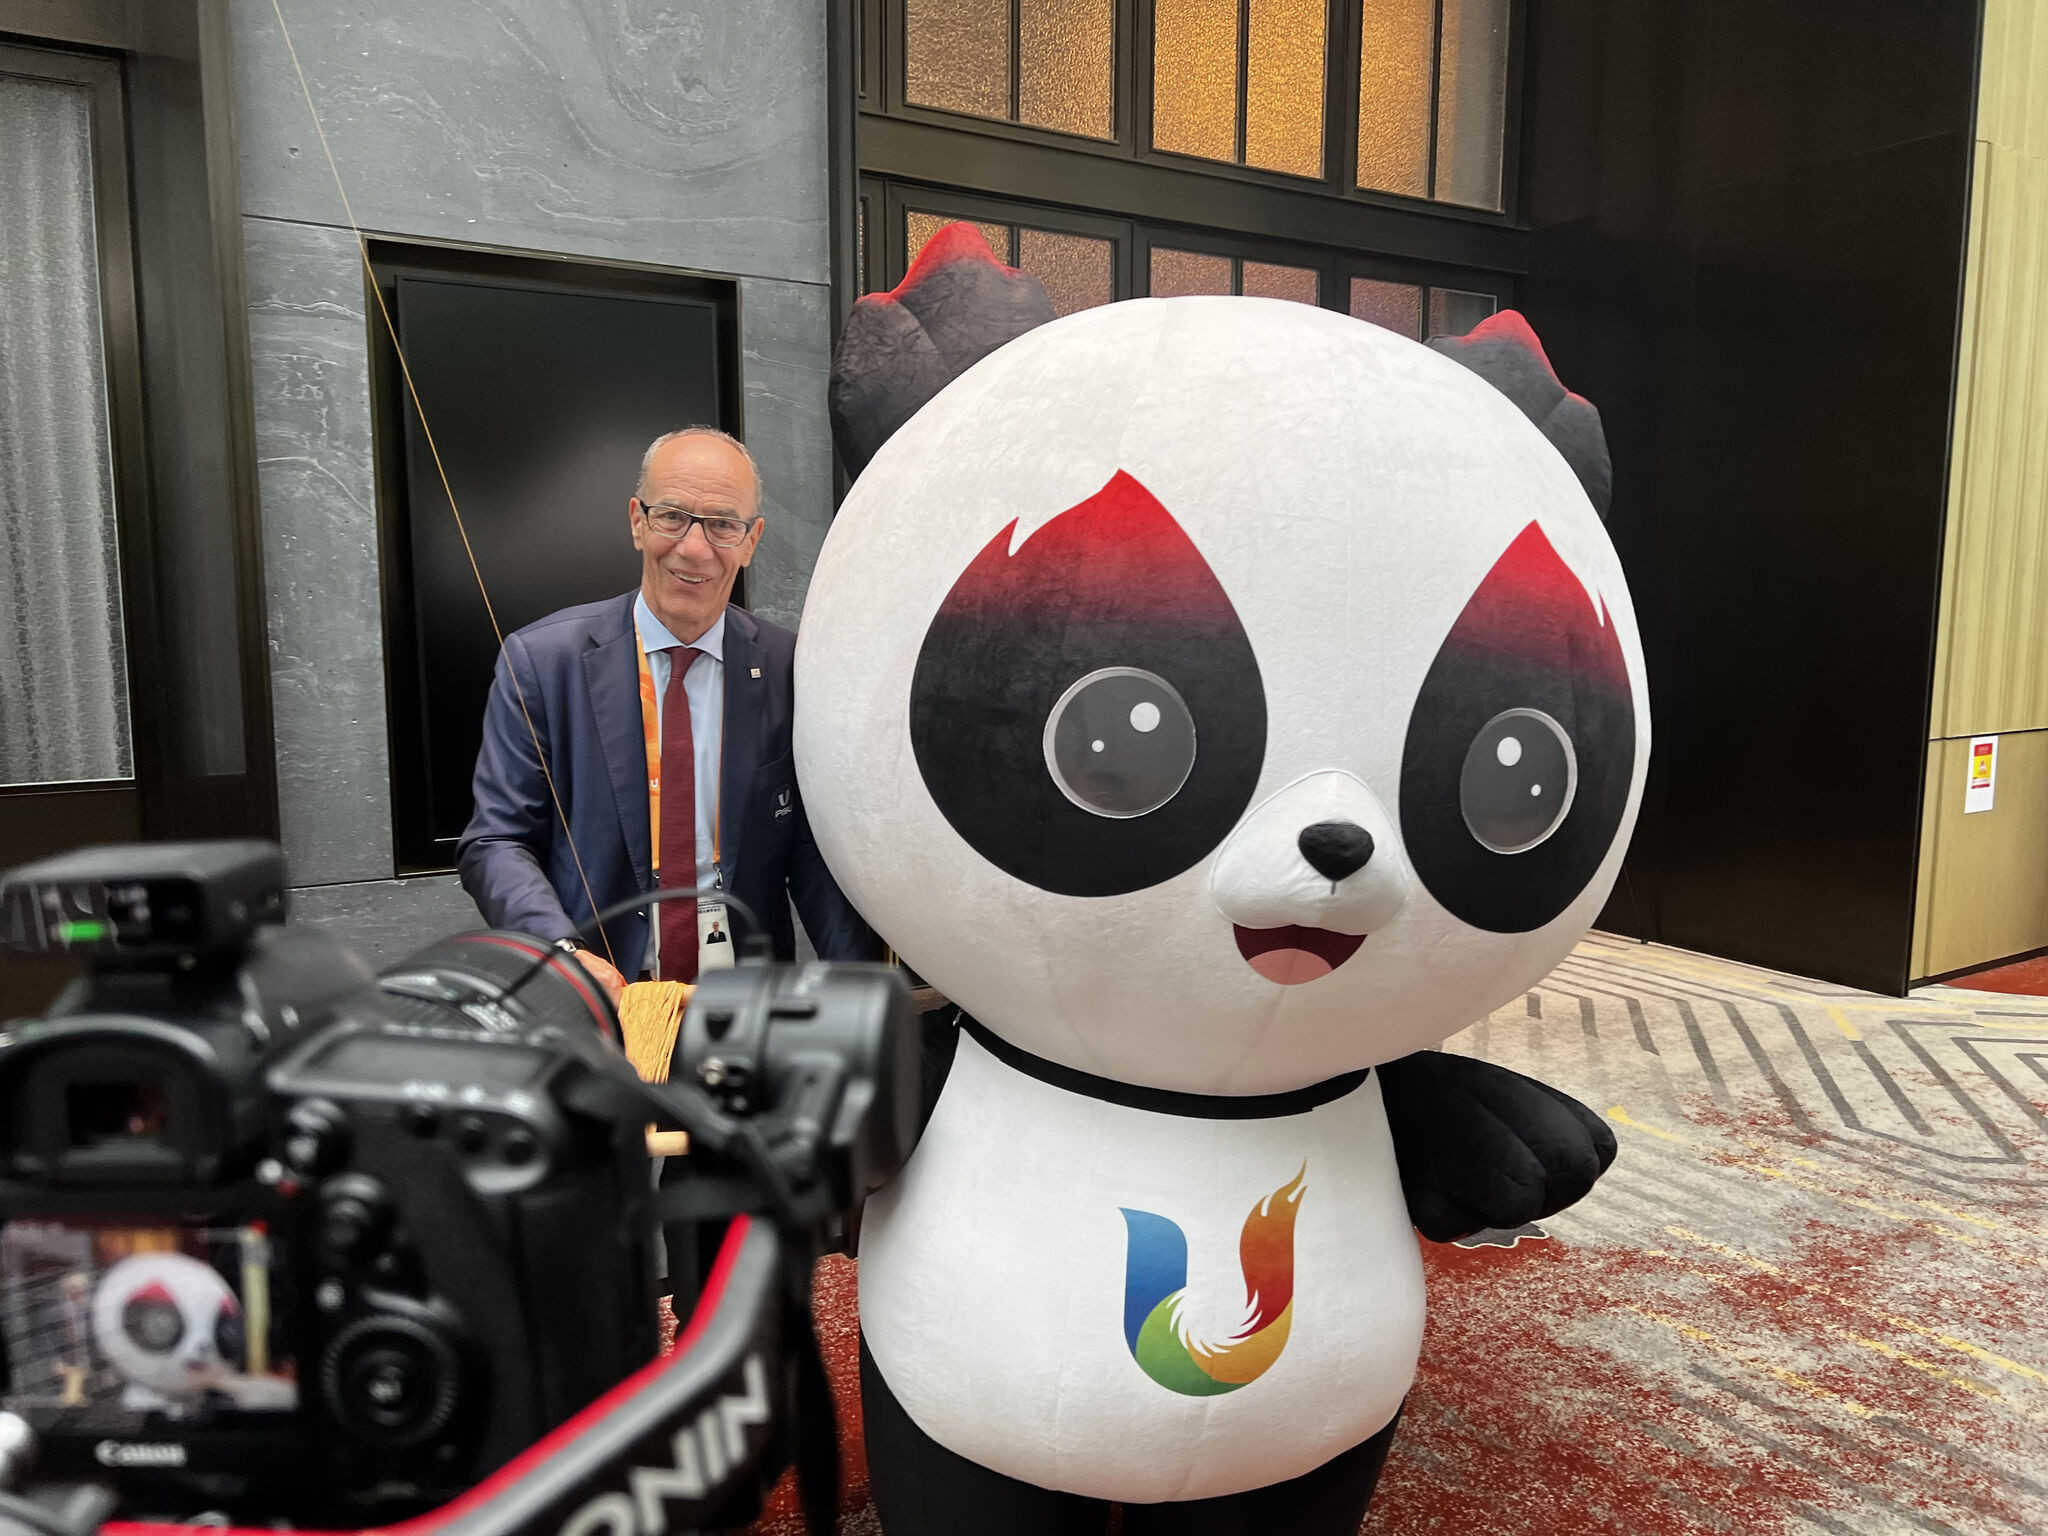 Leonz Eder, the FISU Acting President, says that he is convinced Chengdu will host a 